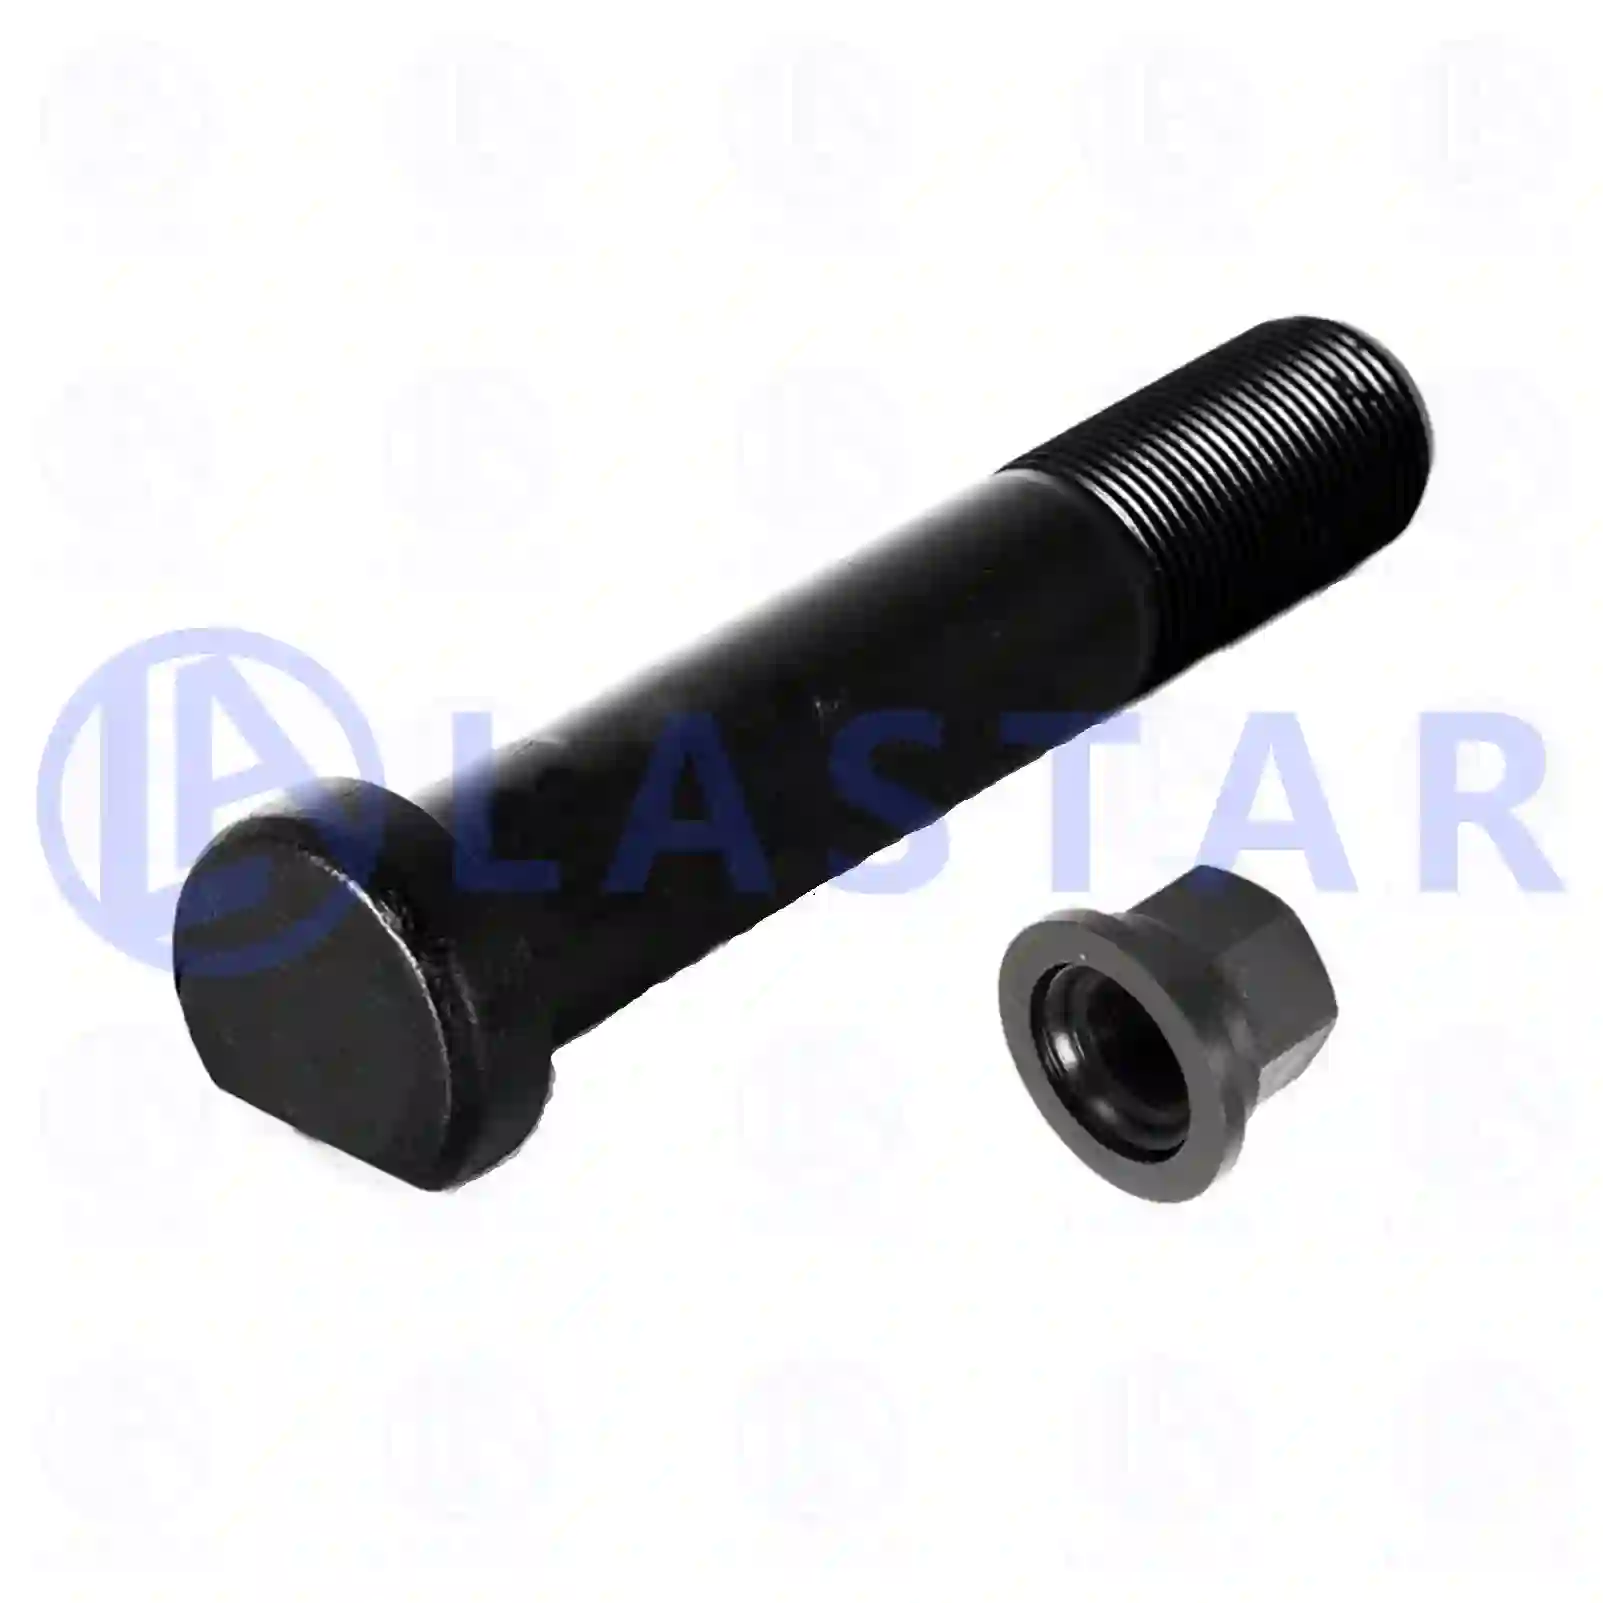 Wheel bolt, complete, 77726429, 3814010671S1, , , , ||  77726429 Lastar Spare Part | Truck Spare Parts, Auotomotive Spare Parts Wheel bolt, complete, 77726429, 3814010671S1, , , , ||  77726429 Lastar Spare Part | Truck Spare Parts, Auotomotive Spare Parts